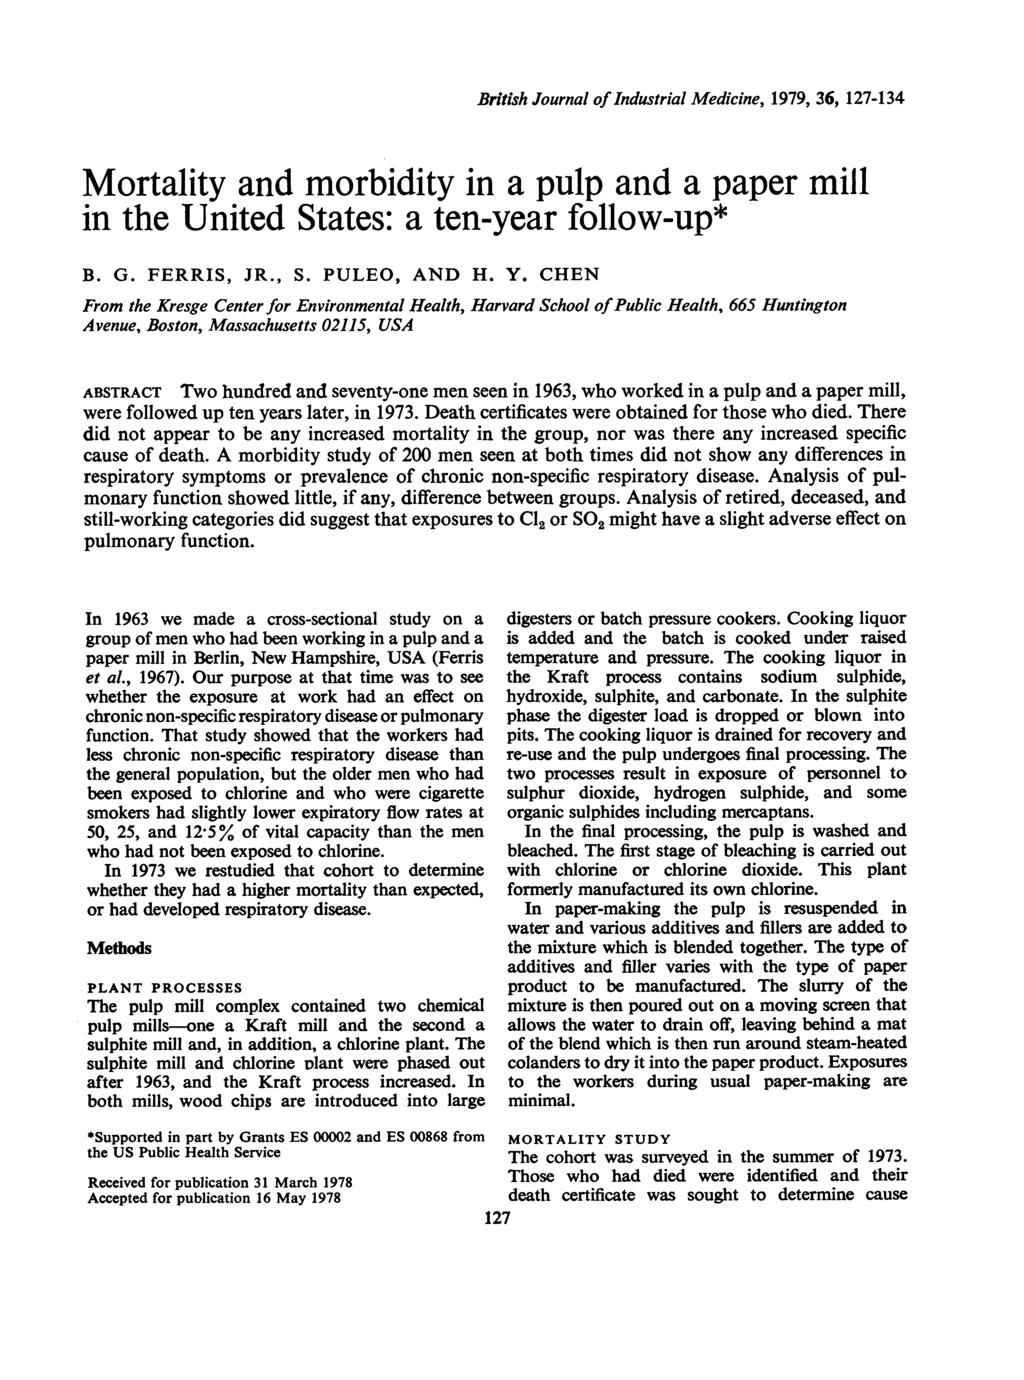 British Journal ofindustrial Medicine, 1979, 36, 127-134 Mortality and morbidity in a pulp and a paper mill in the United States: a ten-year follow-up* B. G. FERRIS, JR., S. PULEO, AND H. Y.